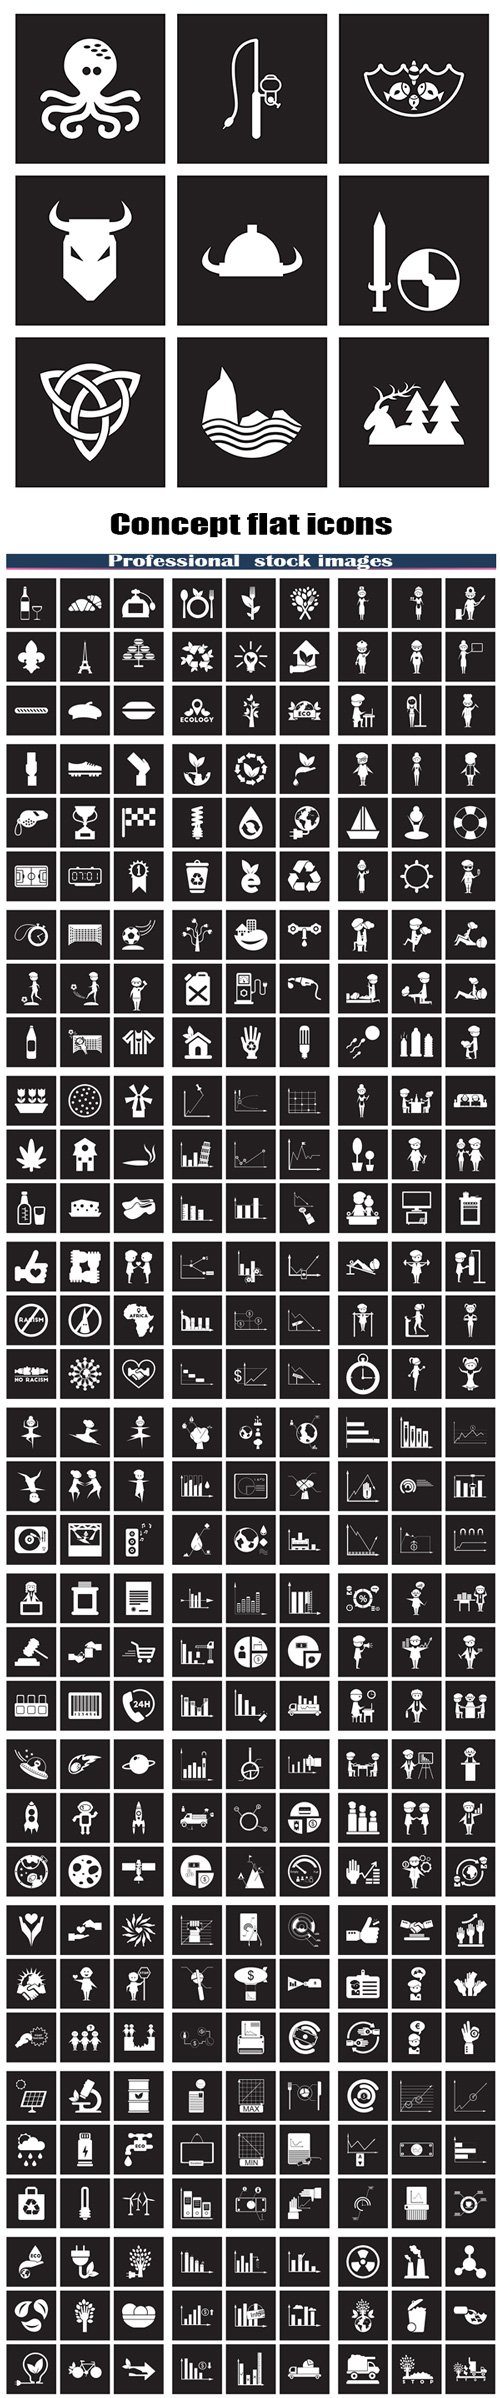 Concept flat icons in black and white